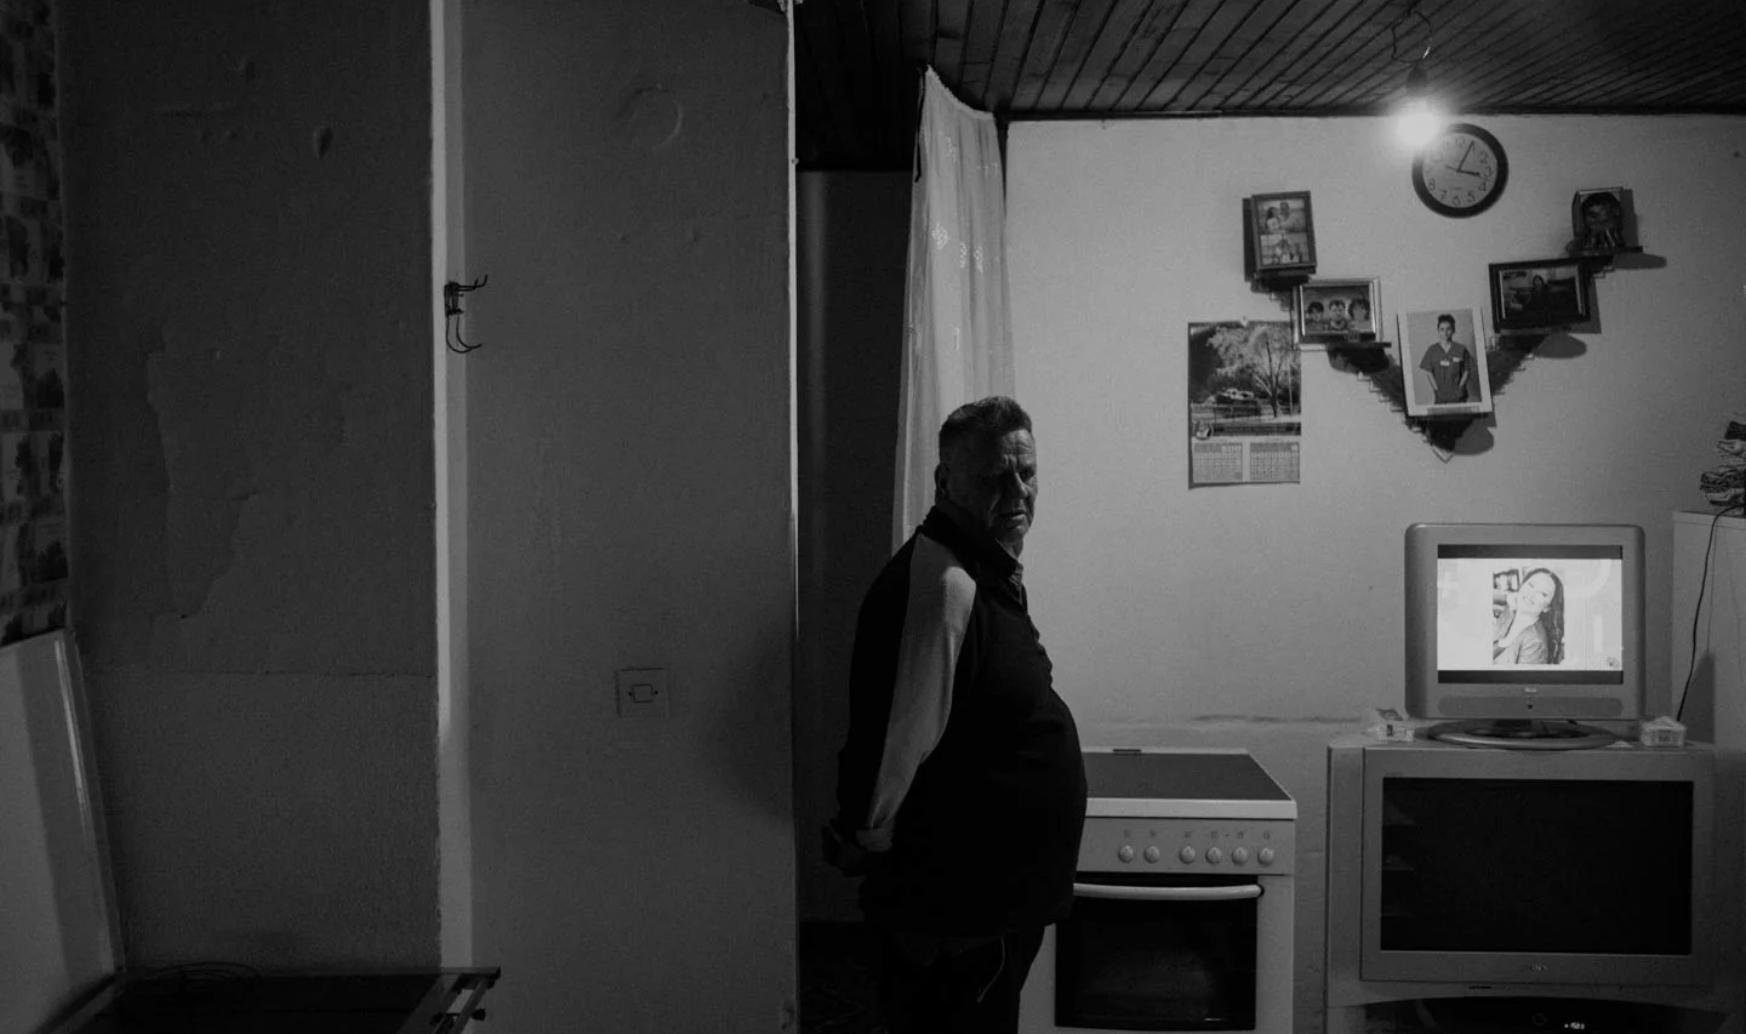 Zaim Alic stands in front of the TV in his barrack in the Ježevac refugee camp. Image by Jošt Franko. Bosnia and Herzegovina, undated.